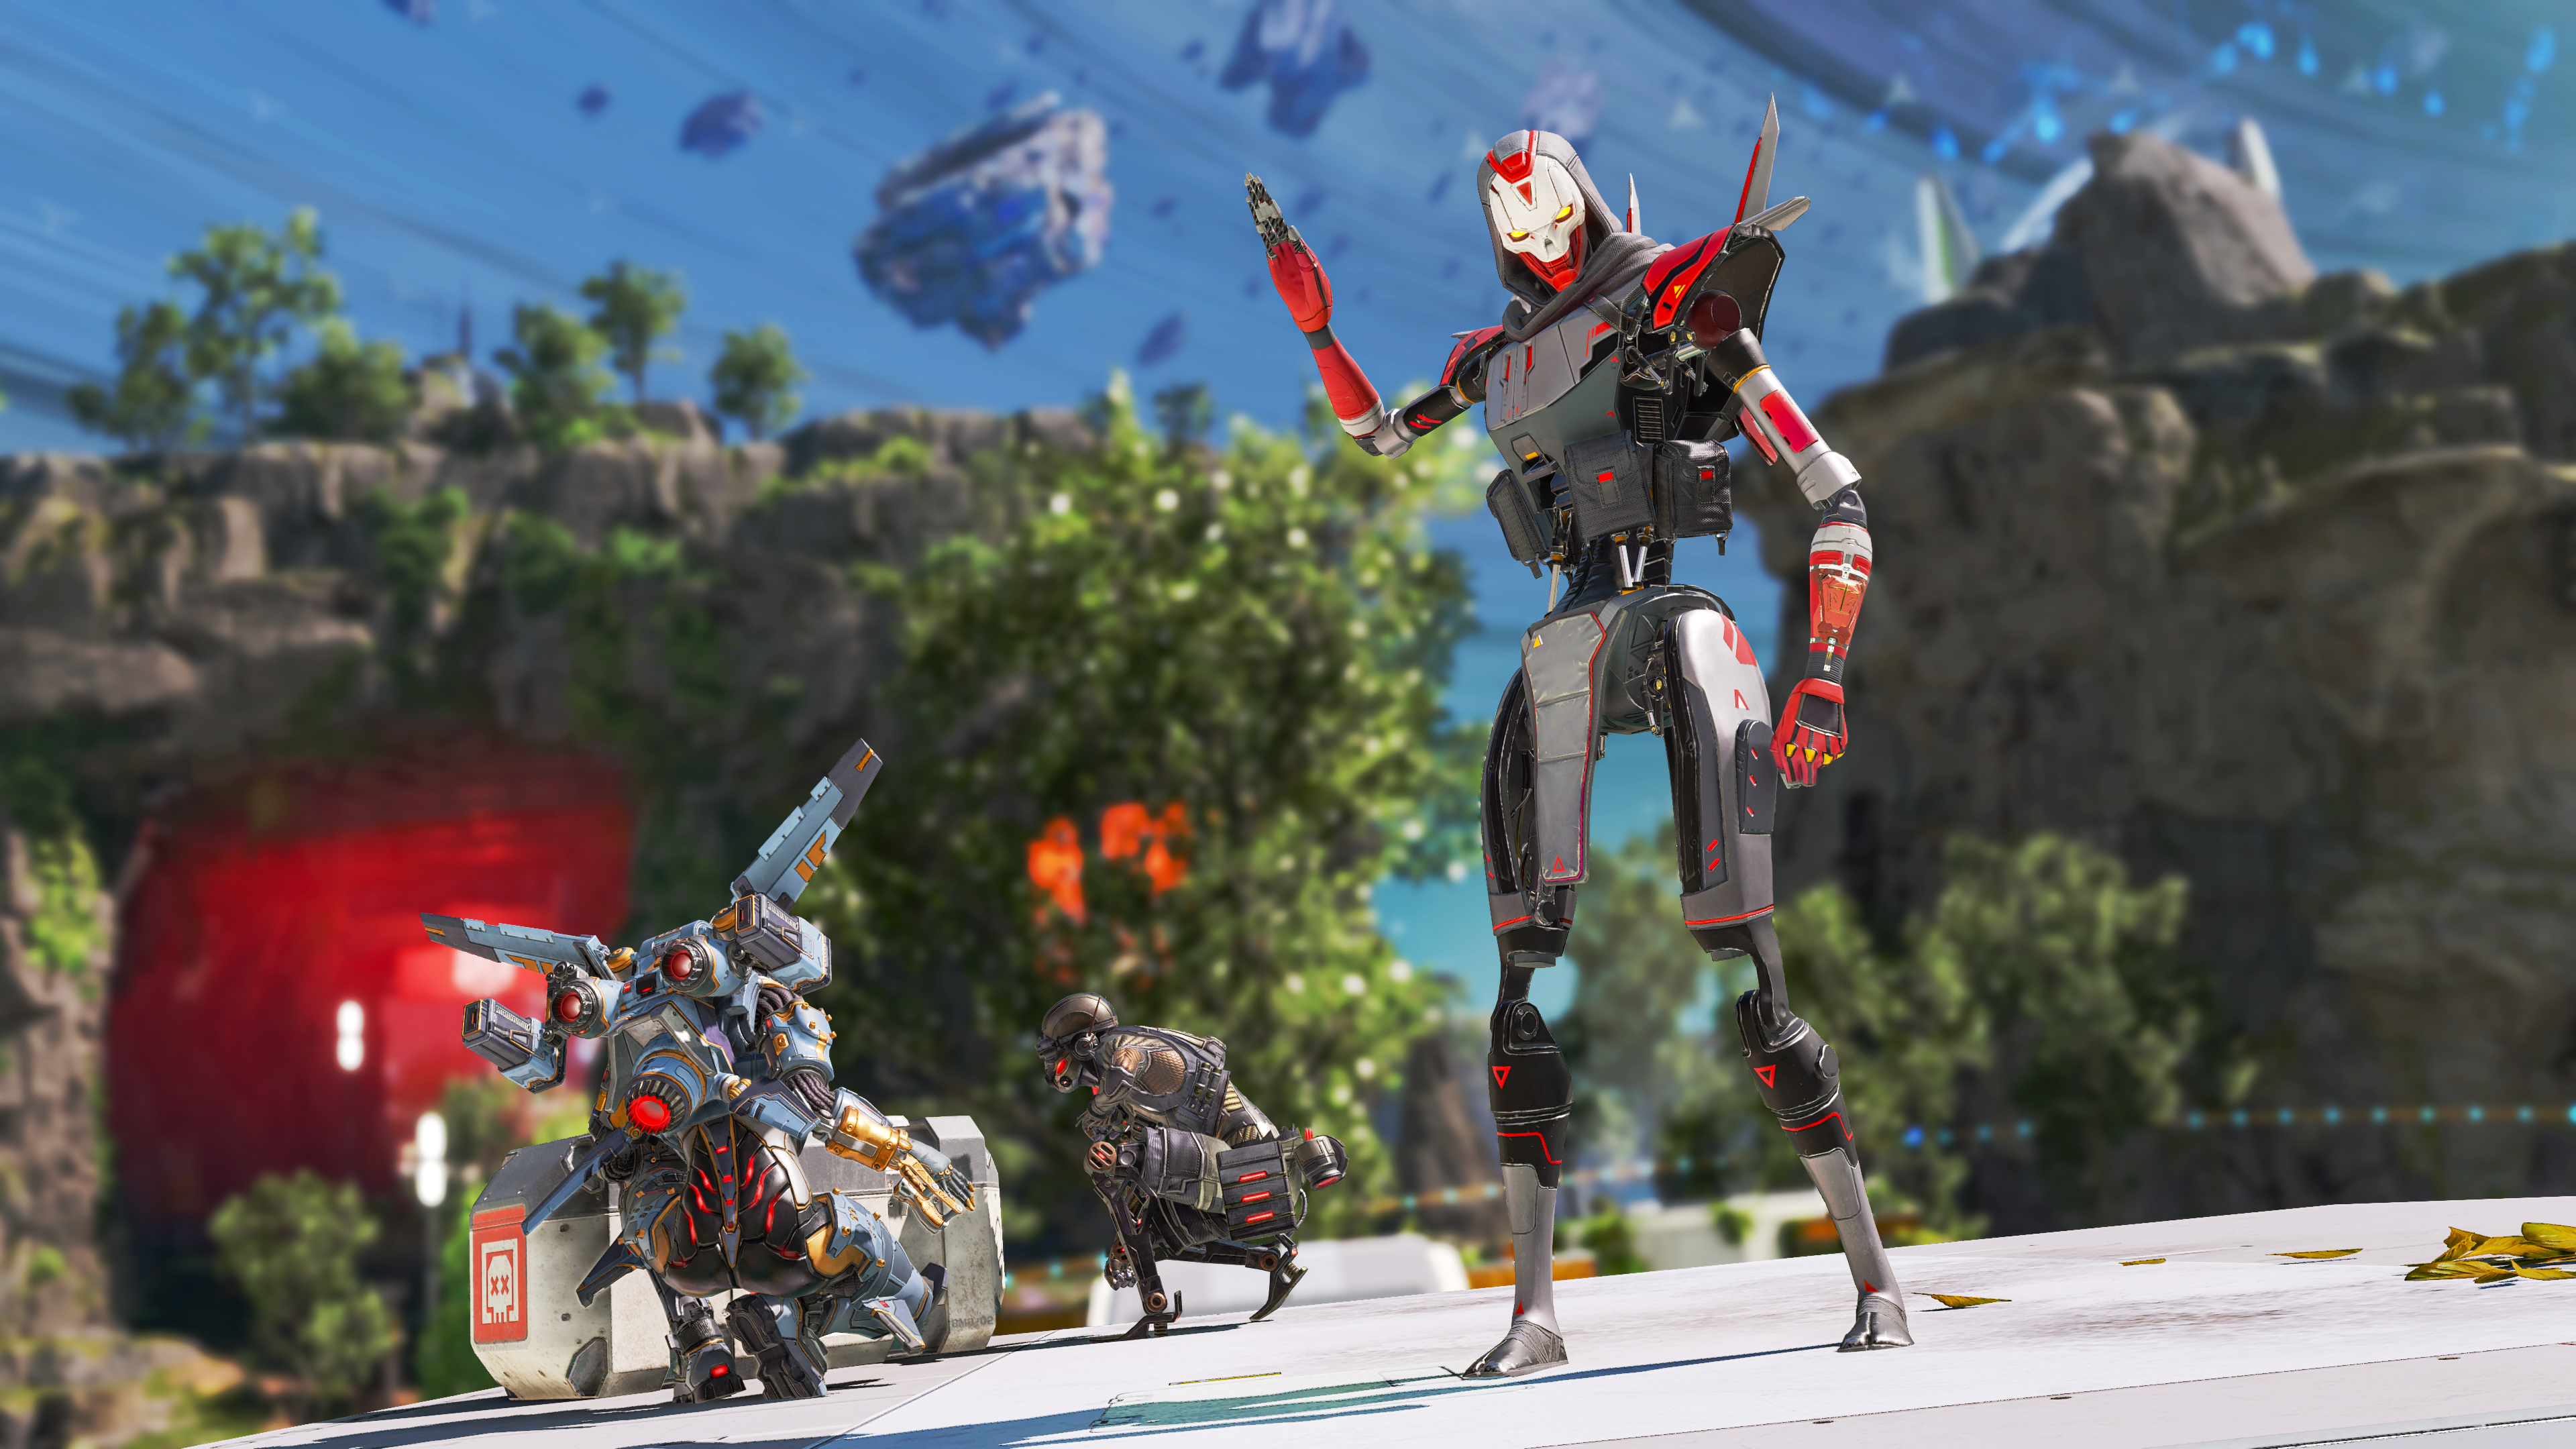 Apex Legends character Revenant raises his right hand while two teammates crouch behind him to open a supply drop